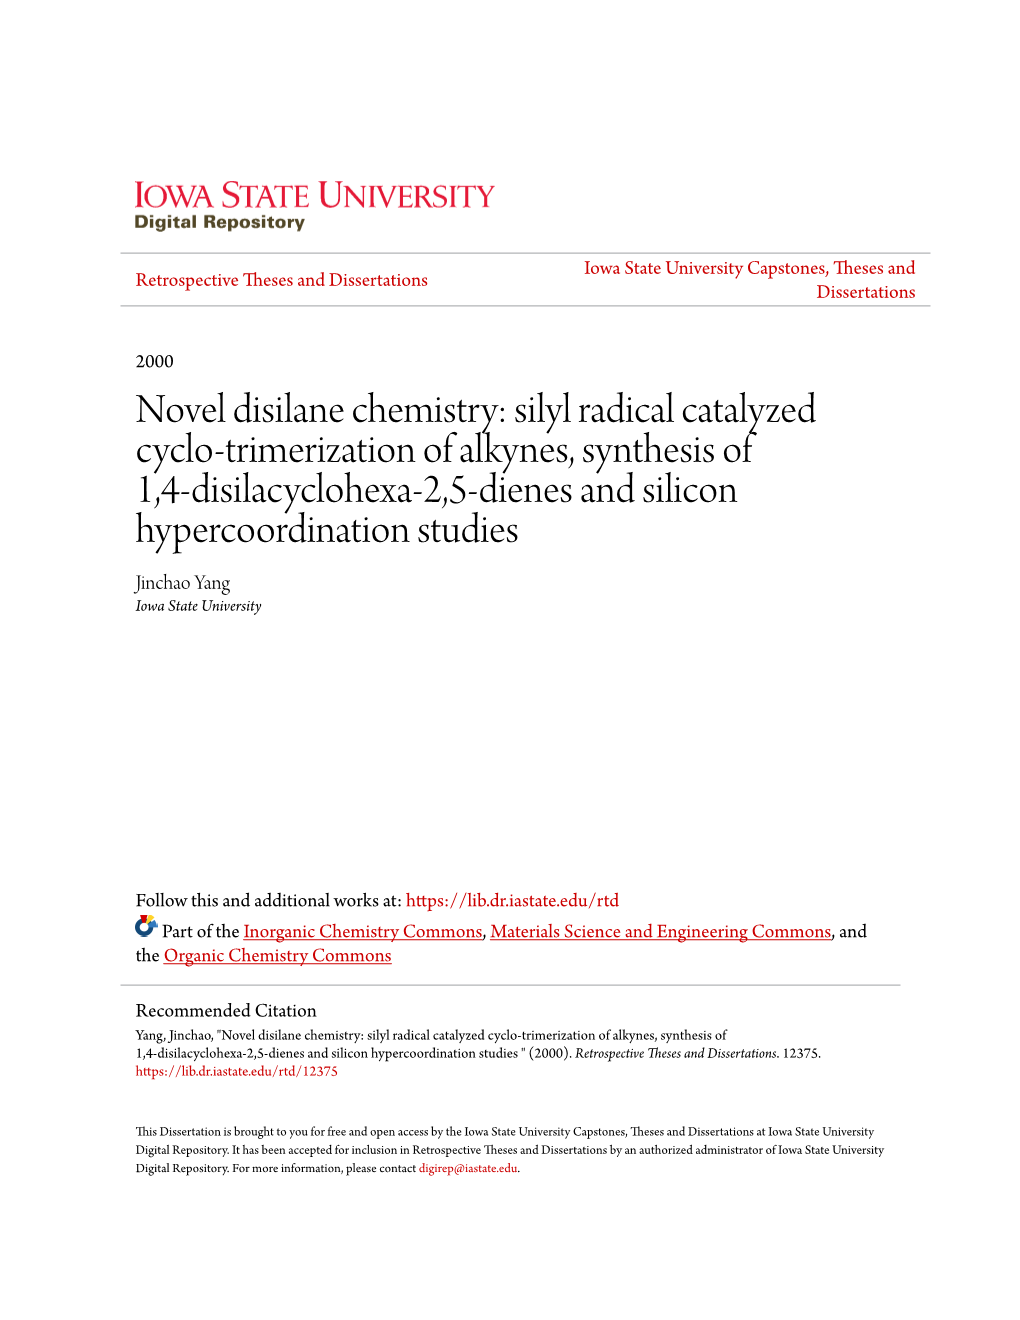 Novel Disilane Chemistry: Silyl Radical Catalyzed Cyclo-Trimerization of Alkynes, Synthesis of 1,4-Disilacyclohexa-2,5-Dienes An